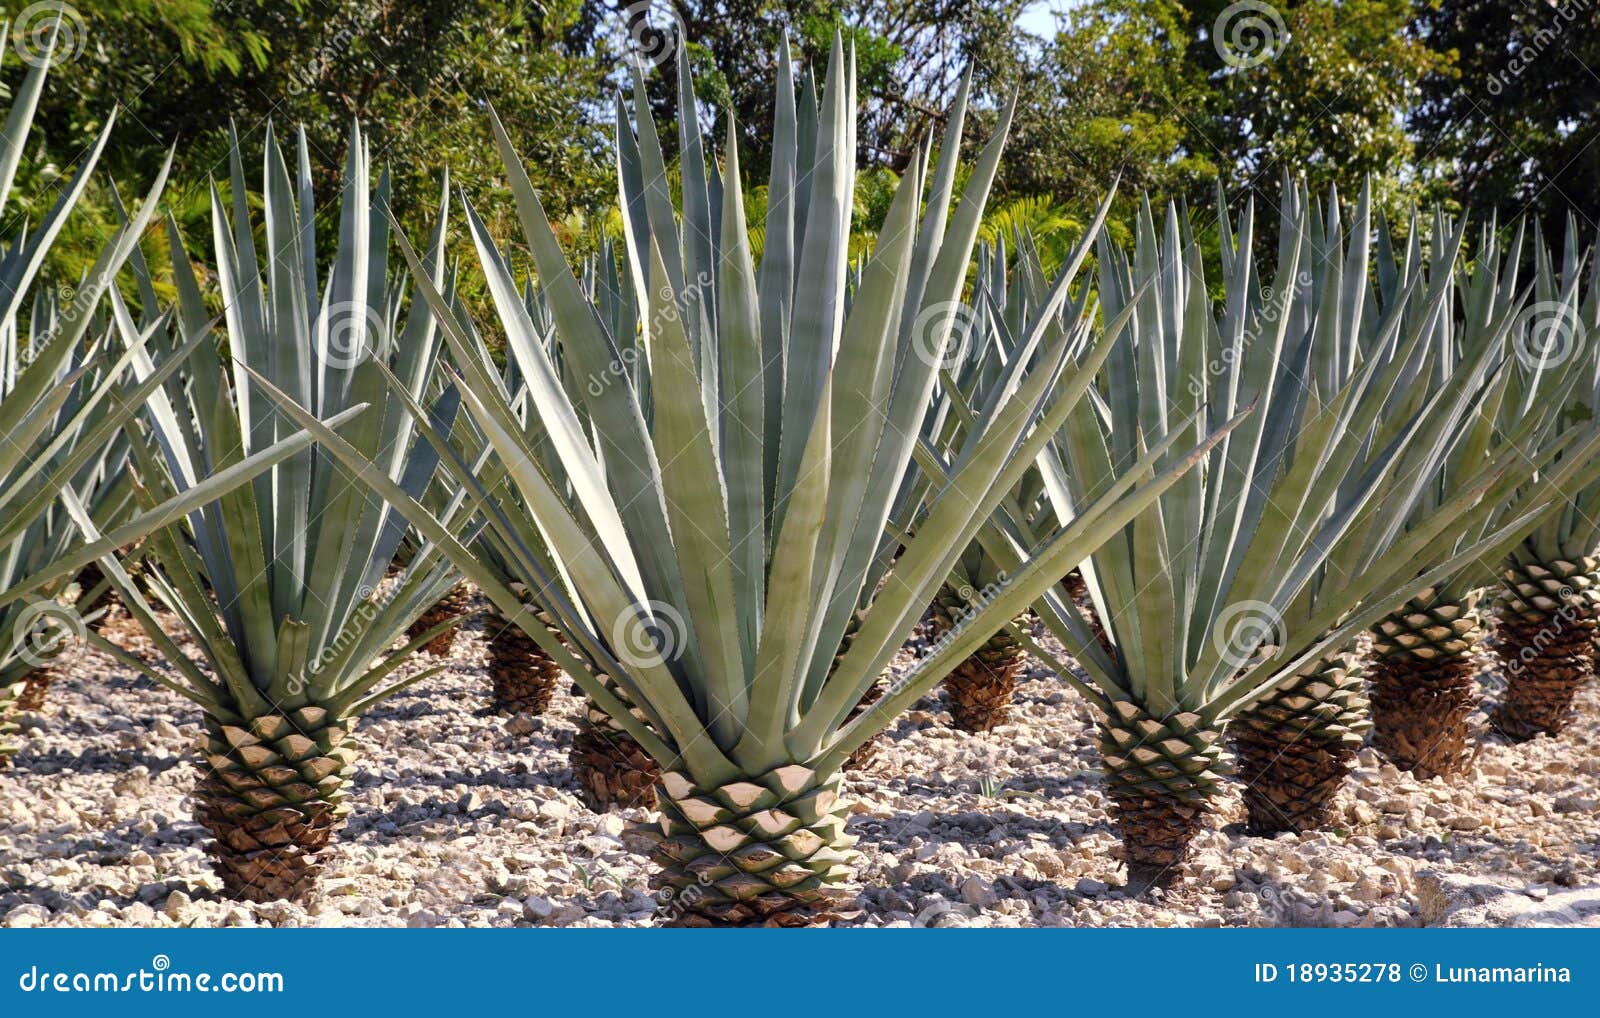 agave tequilana plant for mexican tequila liquor